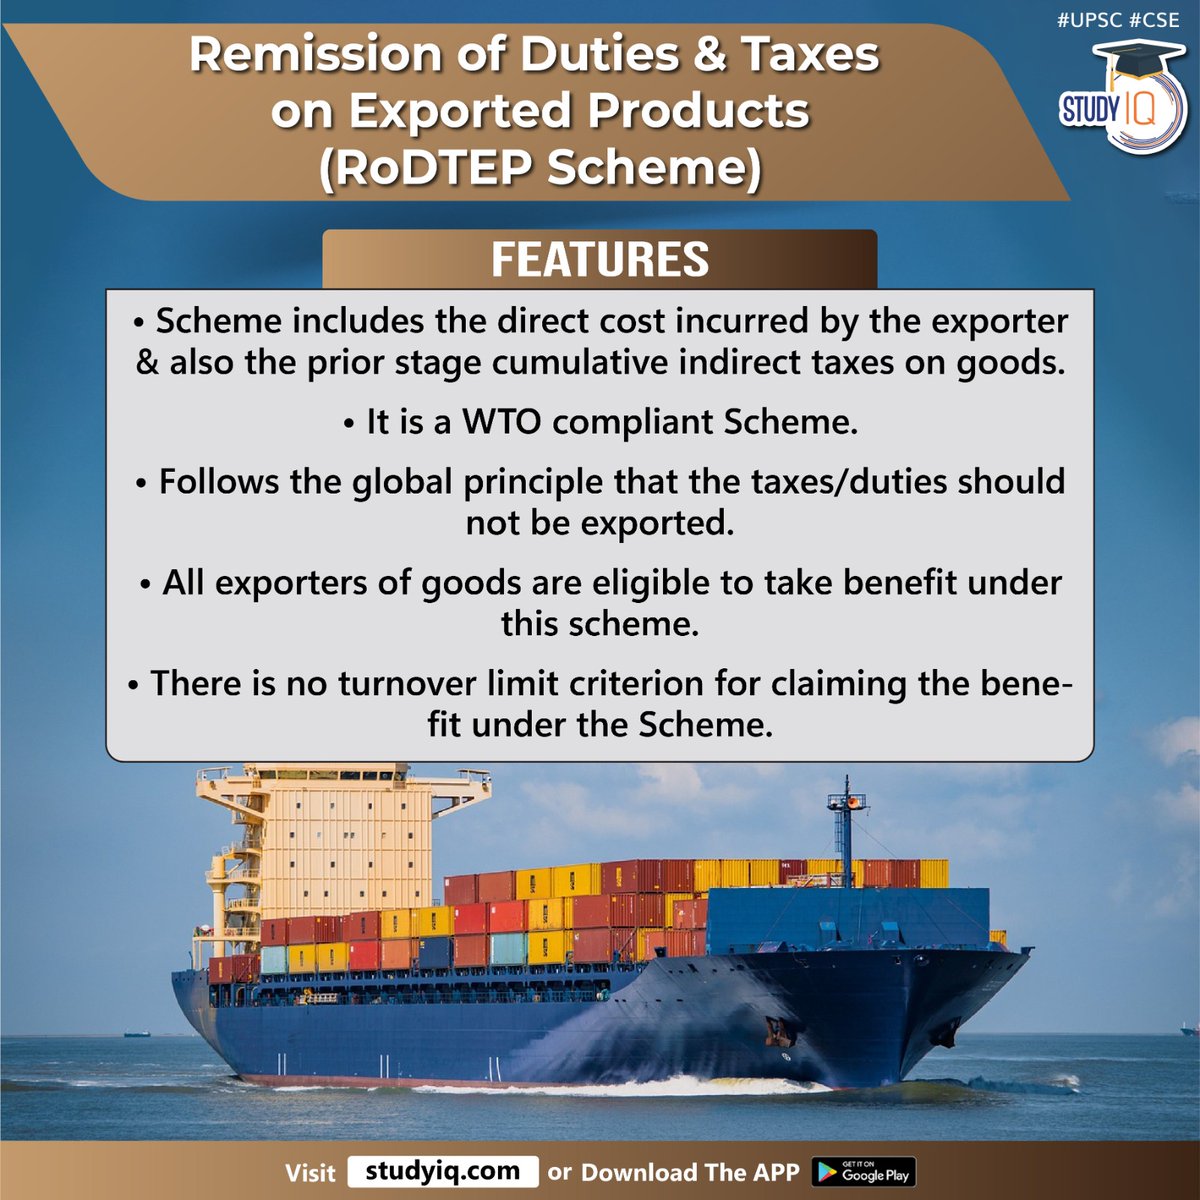 Remission of Duties & Taxes on Exported Products (RoDTEP Scheme)

#remissionofdutiesandtaxes #exportedproducts #rodtepscheme #uniongovt #creditscrip #electronicproducts #domesticexports #merchandiseexportsfromindiascheme #meis #indirecttaxes #goods #wto #upsc #cse #ips #ias